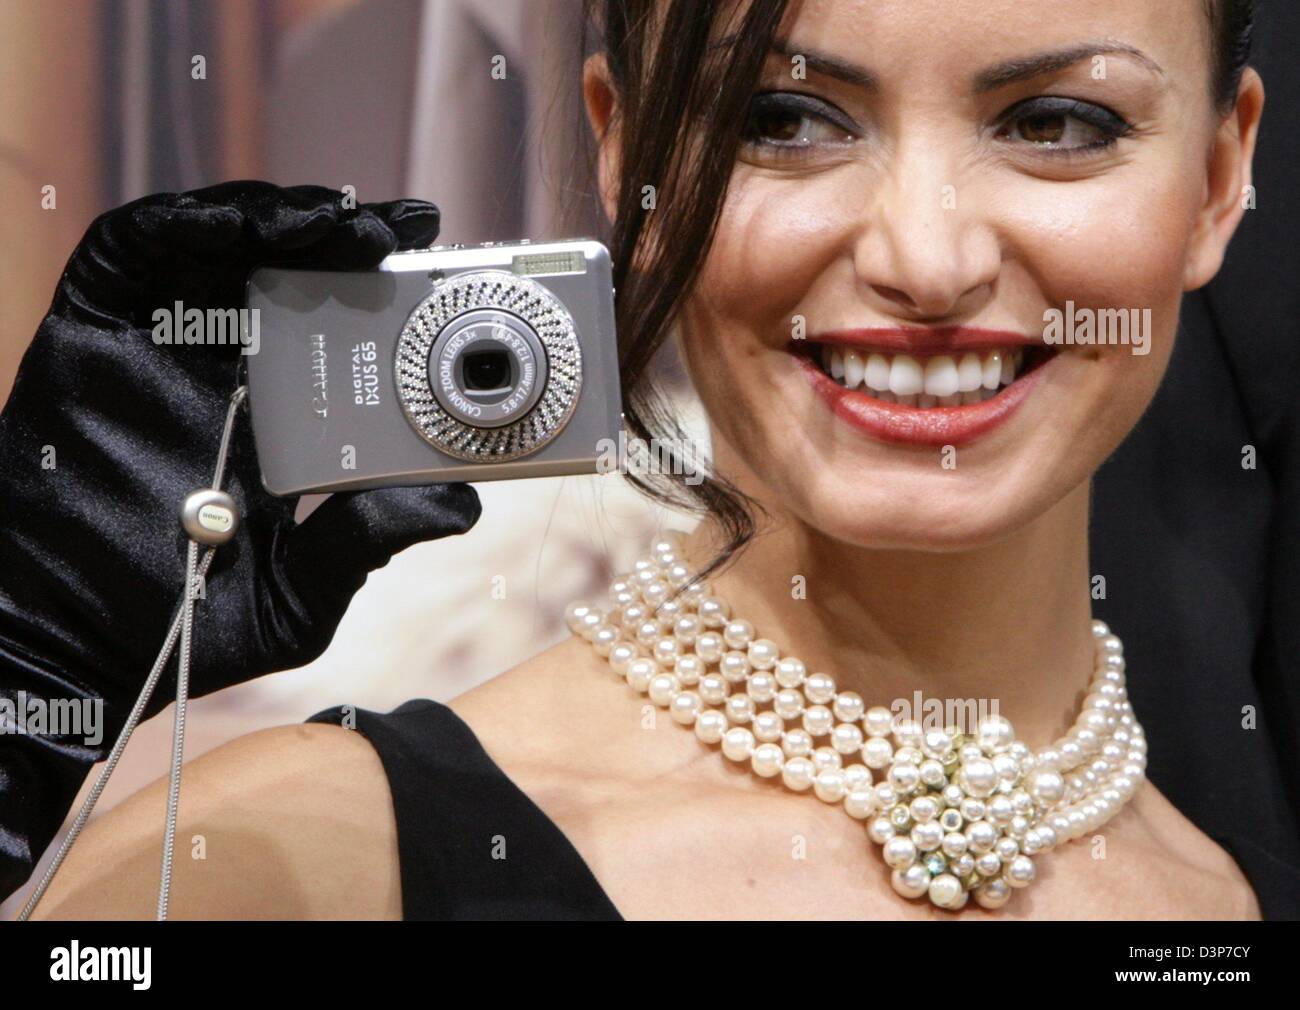 A model dressed as Audrey Hepburn presents a 'Canon Digital Ixus 65' digital camera at the trade fair 'Photokina' in Cologne, Germany, Monday, 25 Septmeber 2006. The world's largest photography trade fair will take place until 1st October 2006. Photo: Federico Gambarini Stock Photo